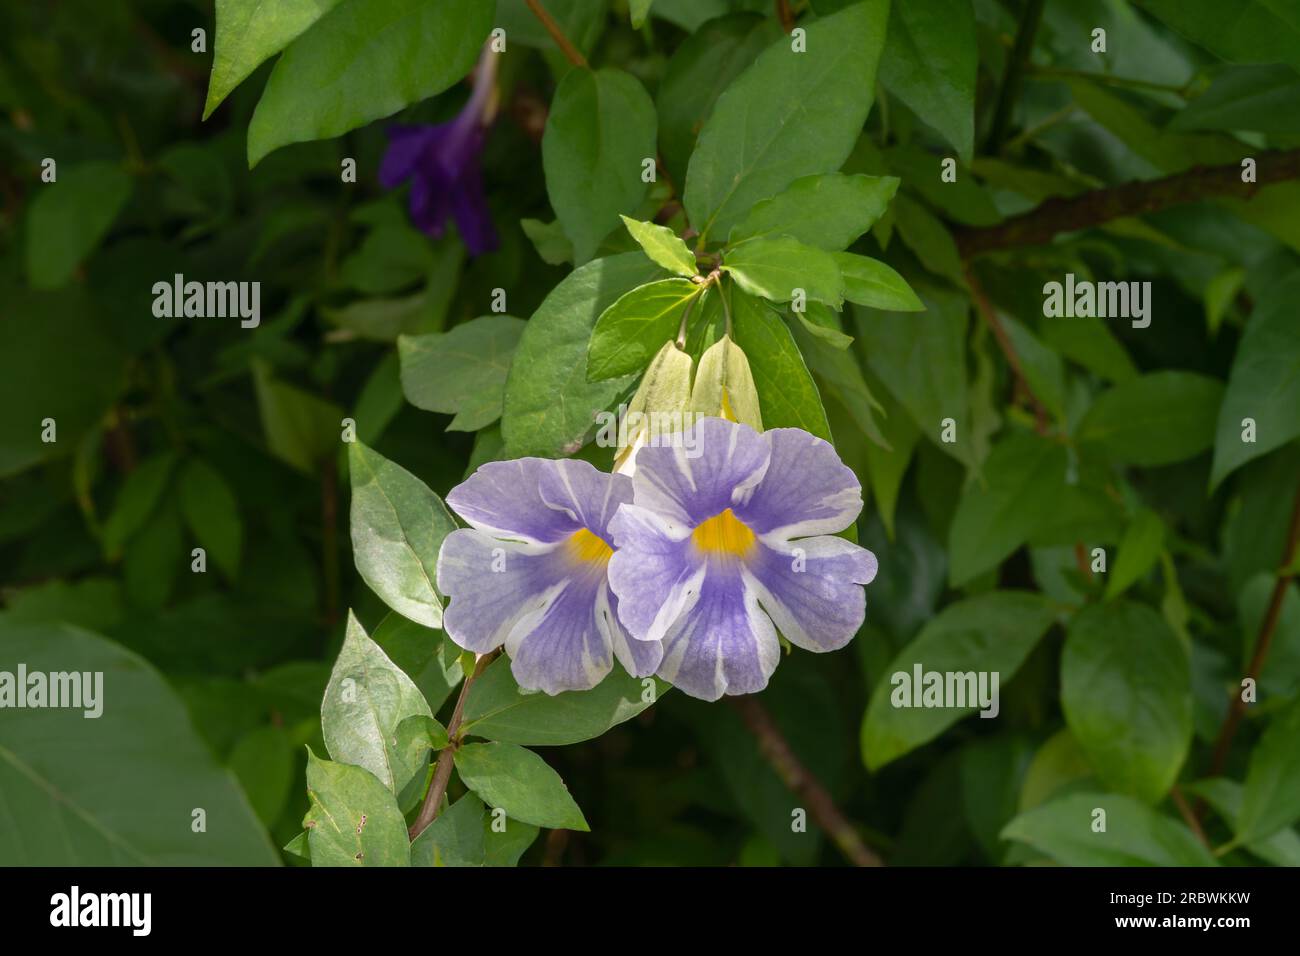 Closeup view of purple blue and white variegated flowers of thunbergia erecta shrub aka bush clock vine or king's mantle outdoors in tropical garden Stock Photo